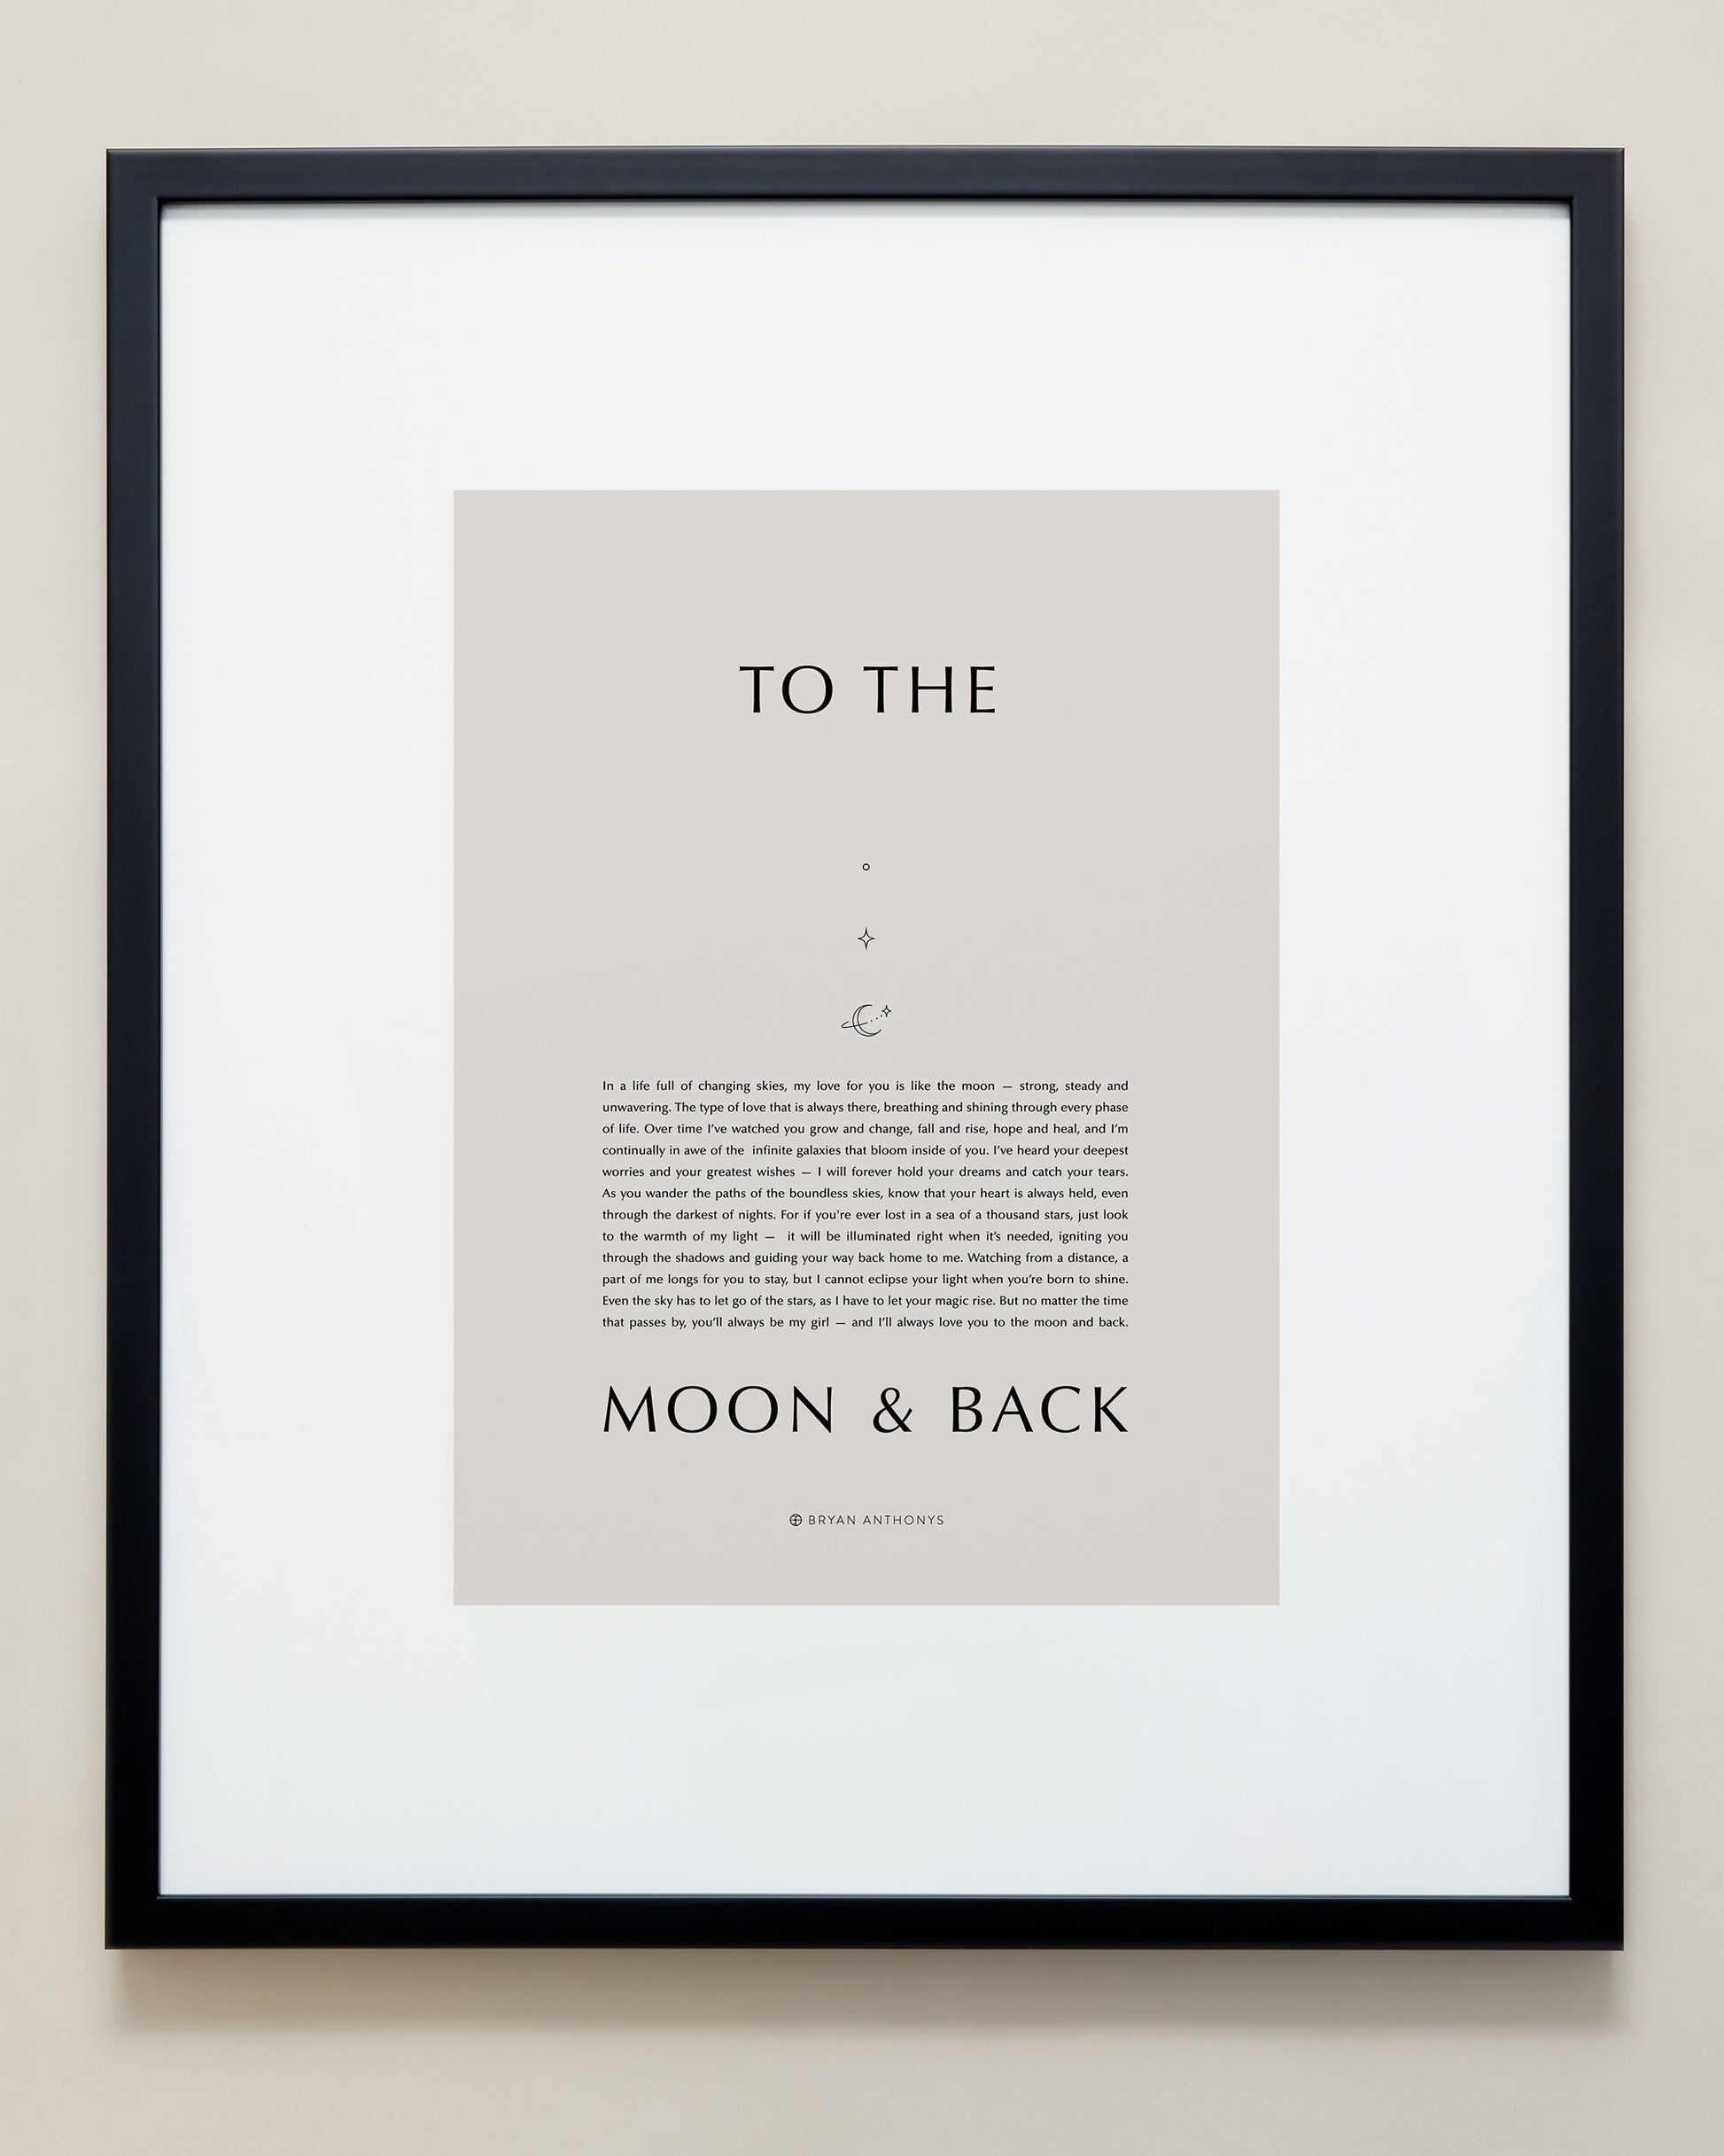 Bryan Anthonys Home Decor Purposeful Prints To The Moon & Back Iconic Framed Print Tan Art With Black Frame 20x24